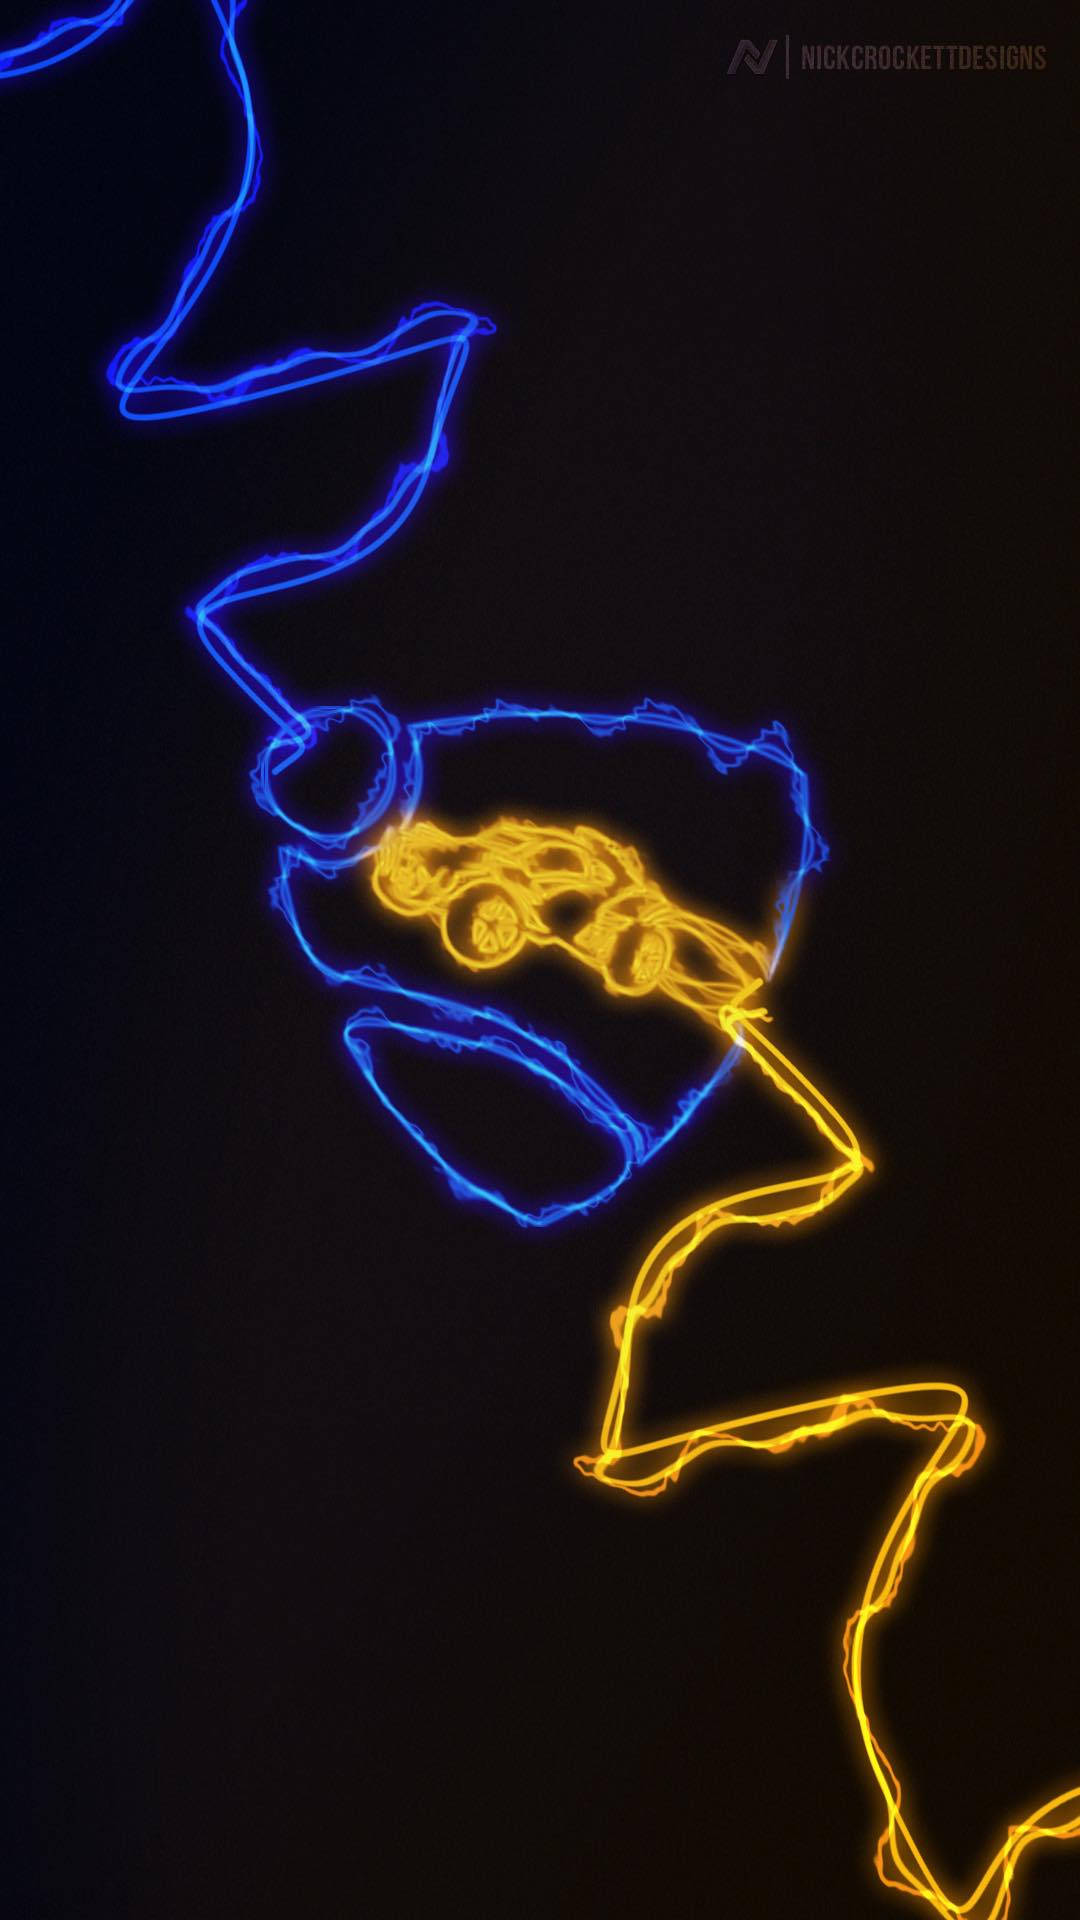 Neon Yellow Car Rocket League Iphone Background